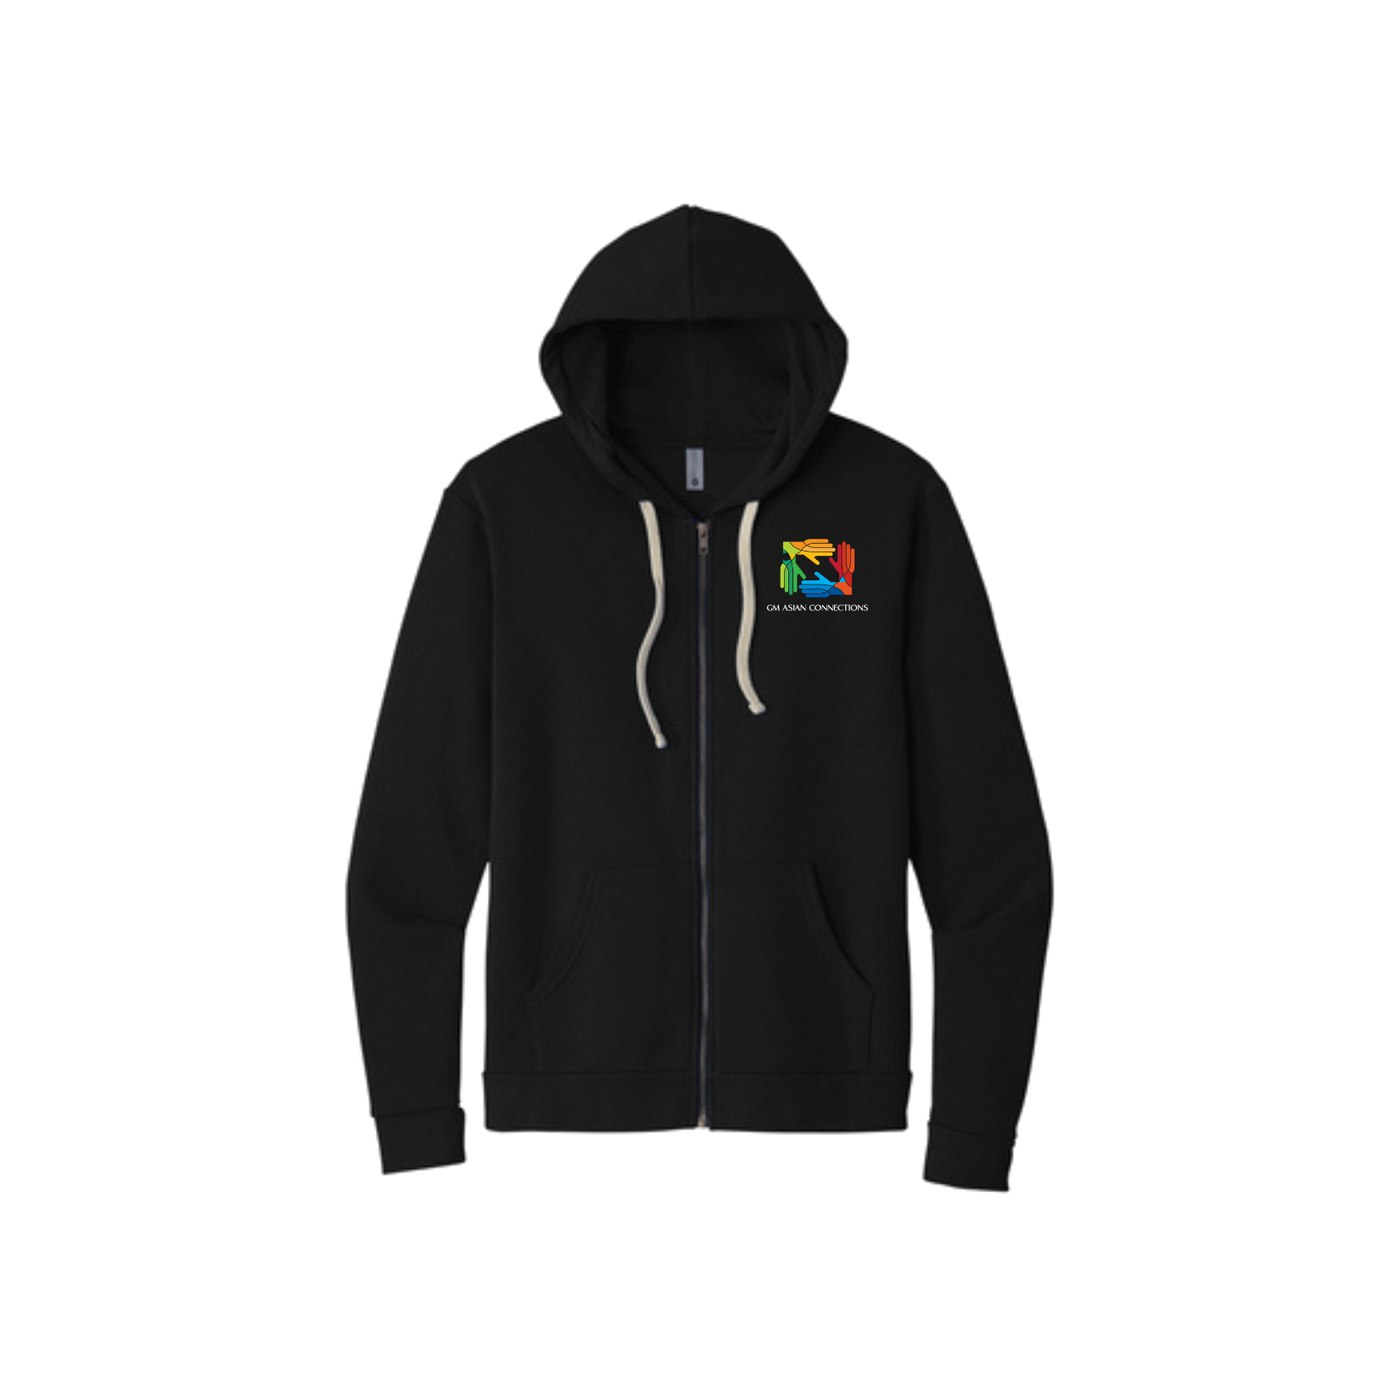 GM Asian Connections ERG Zip-Up Hoodie